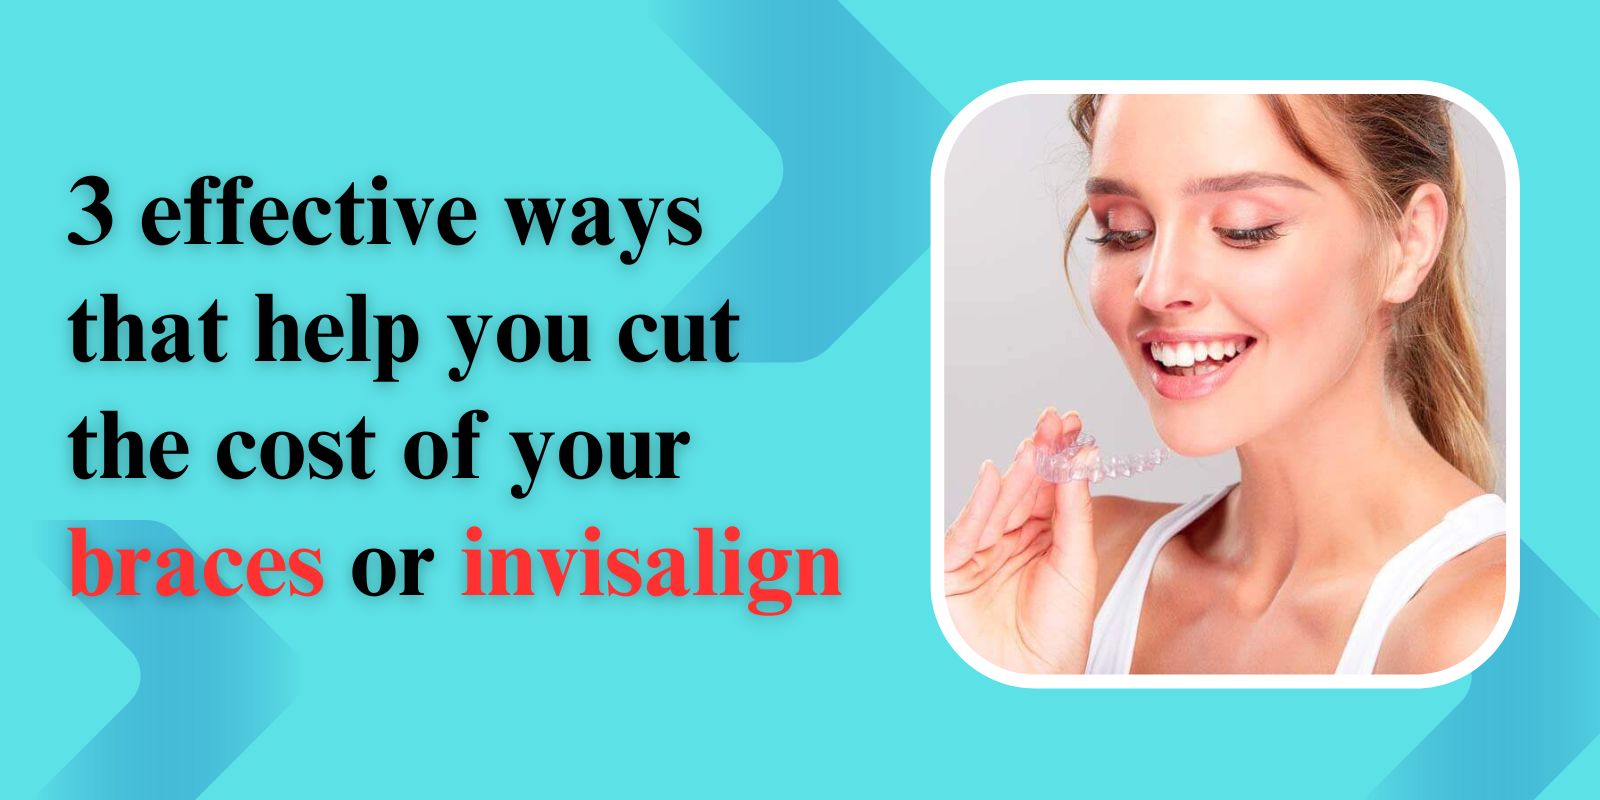 #3 effective ways that help you cut the cost of your braces or invisalign